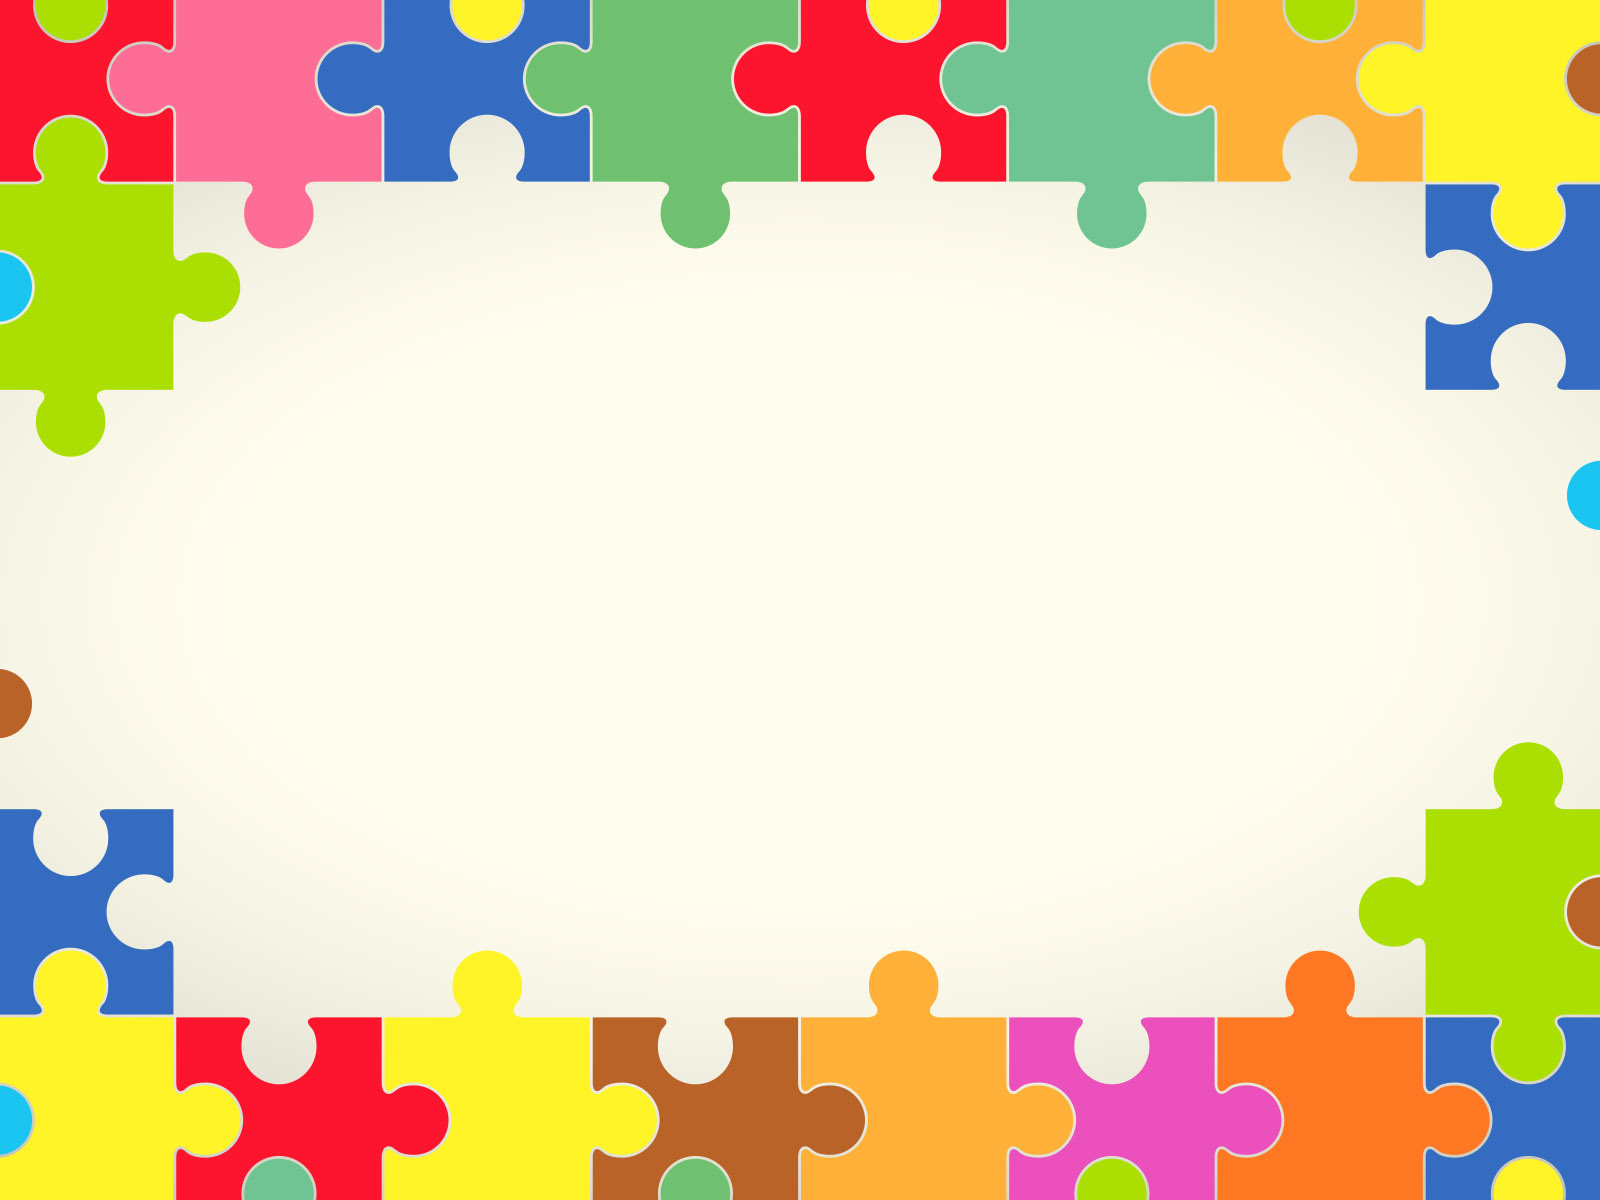 Colourful Puzzles Powerpoint Templates - Border & Frames, Objects - Free PPT  Backgrounds and Templates